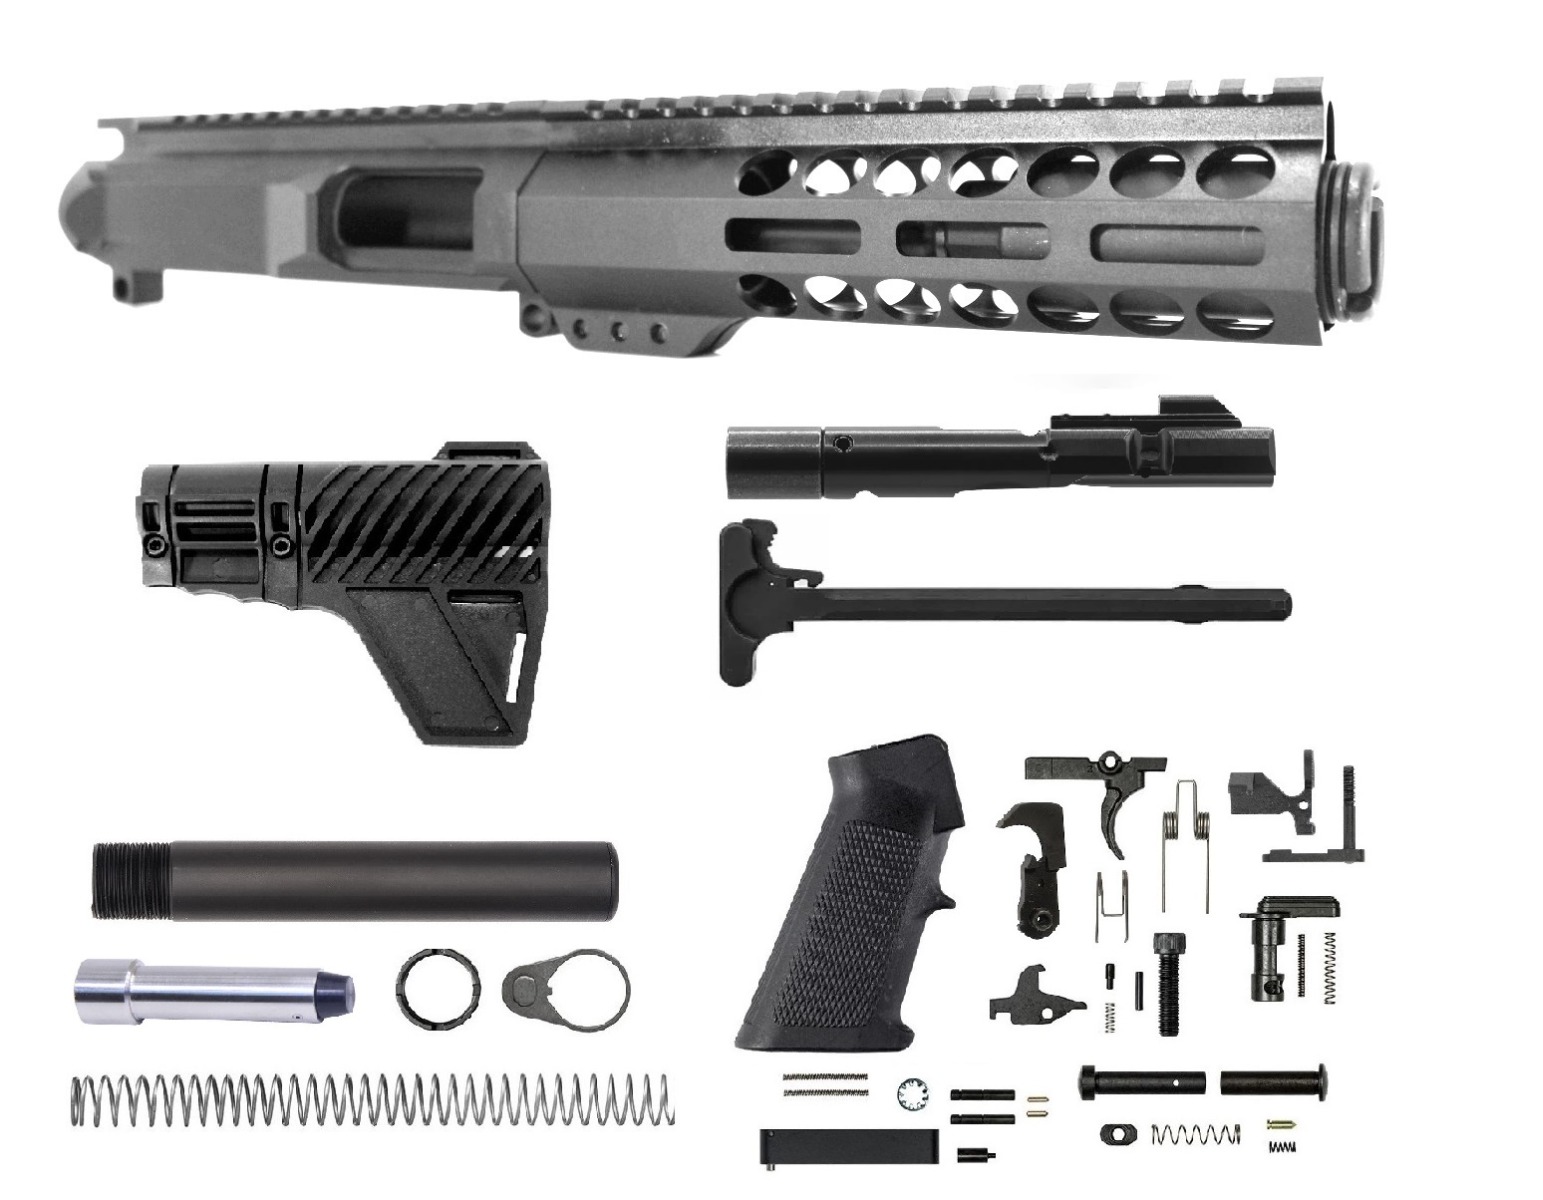 5 inch AR-15 / AR-45 45 ACP Pistol Caliber Melonite Upper w/CAN Complete Kit | Pro2a Tactical